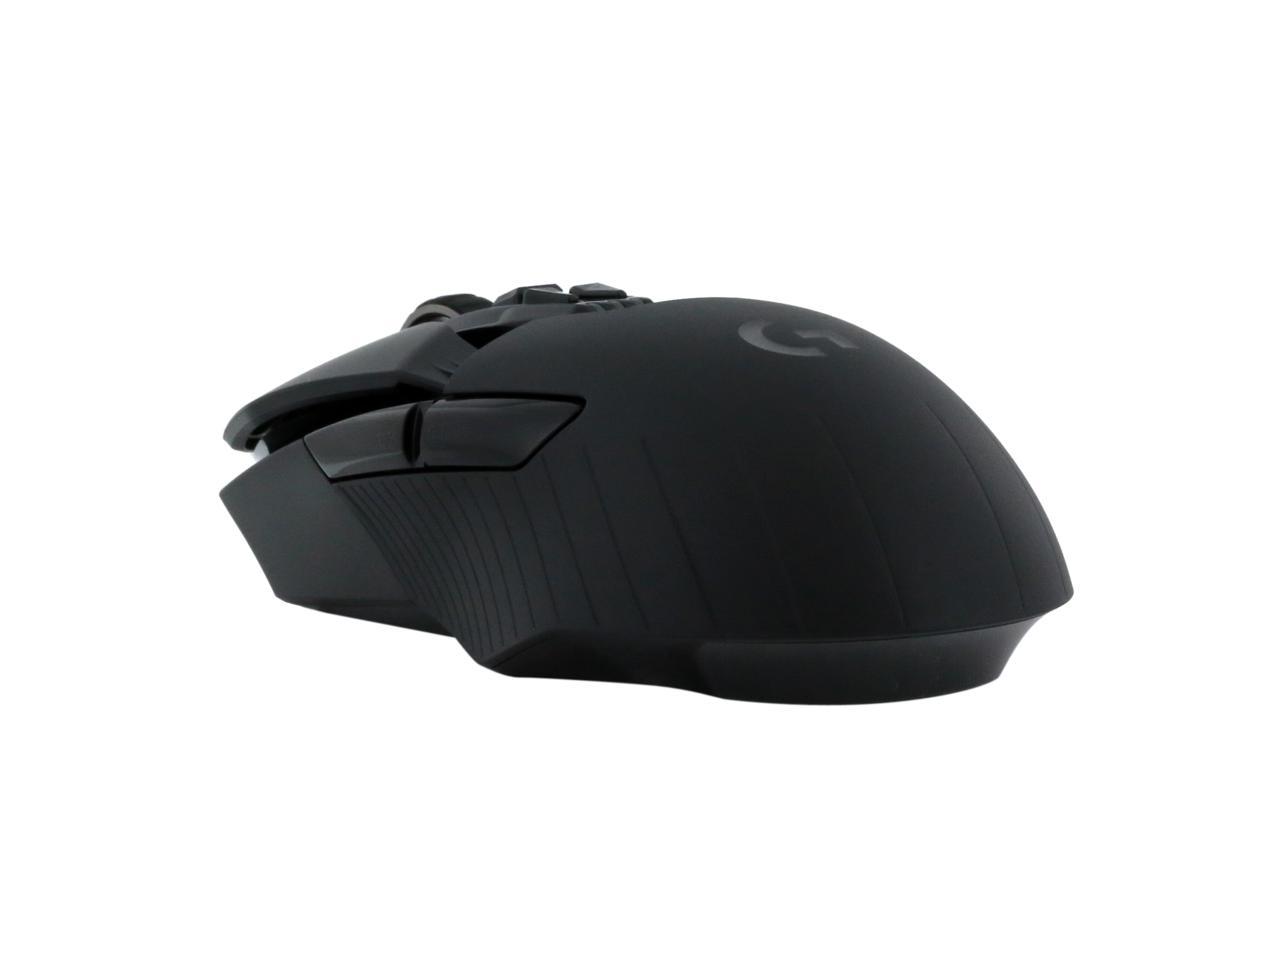 Lager bungee jump Lave om Logitech G903 LIGHTSPEED Wireless Gaming Mouse W/ Hero 25K Sensor,  PowerPlay Compatible, 140+ Hour with Rechargeable Battery and Lightsync  RGB, Ambidextrous, 107G+10G optional, 25,600 DPI, Black - Newegg.com